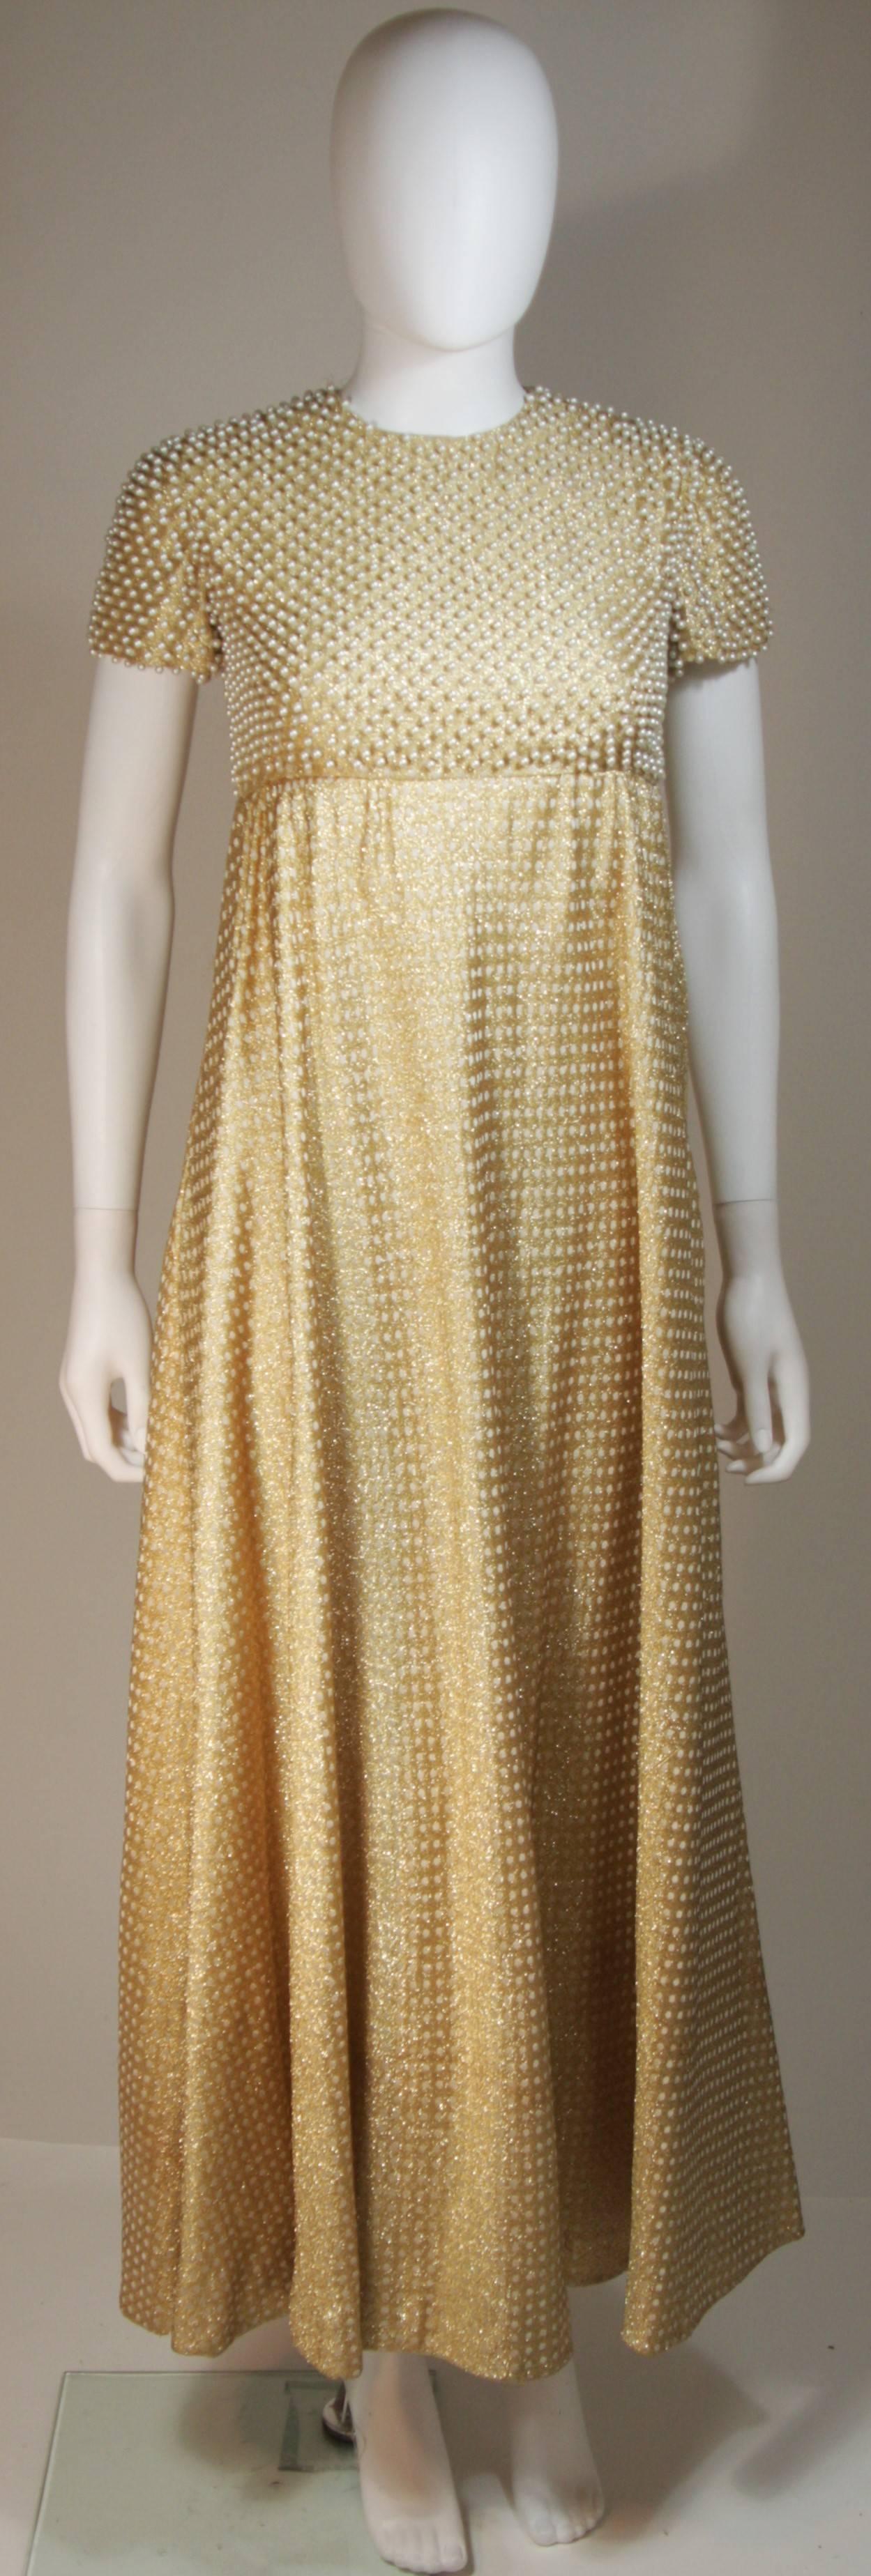 This Geoffrey Beene  gown is composed of a gold metallic knit with polka dot design, and hand beaded small pearl bodice. Gown is lined in soft white silk.
There are side pockets and a center back zipper closure with hook and eyes. 
In excellent